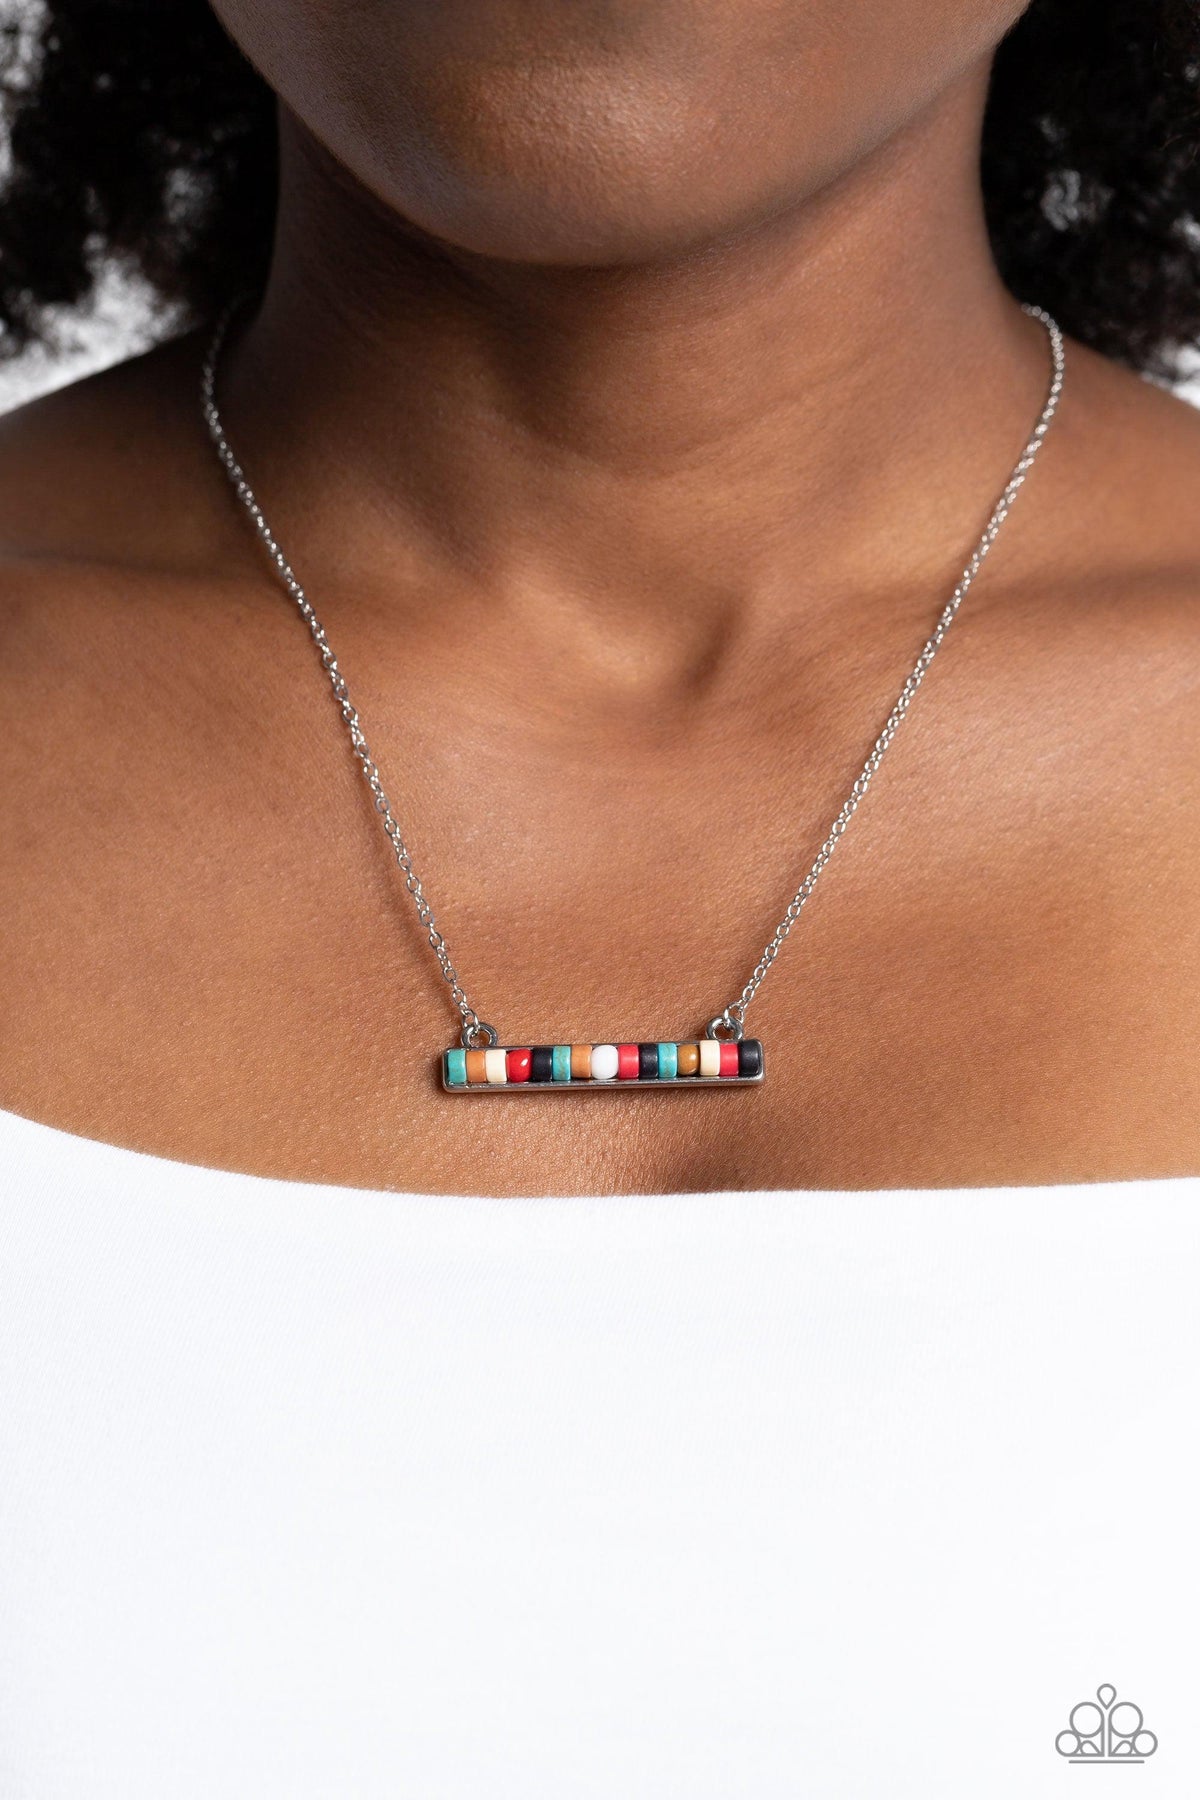 Barred Bohemian Multi Necklace - Paparazzi Accessories-on model - CarasShop.com - $5 Jewelry by Cara Jewels